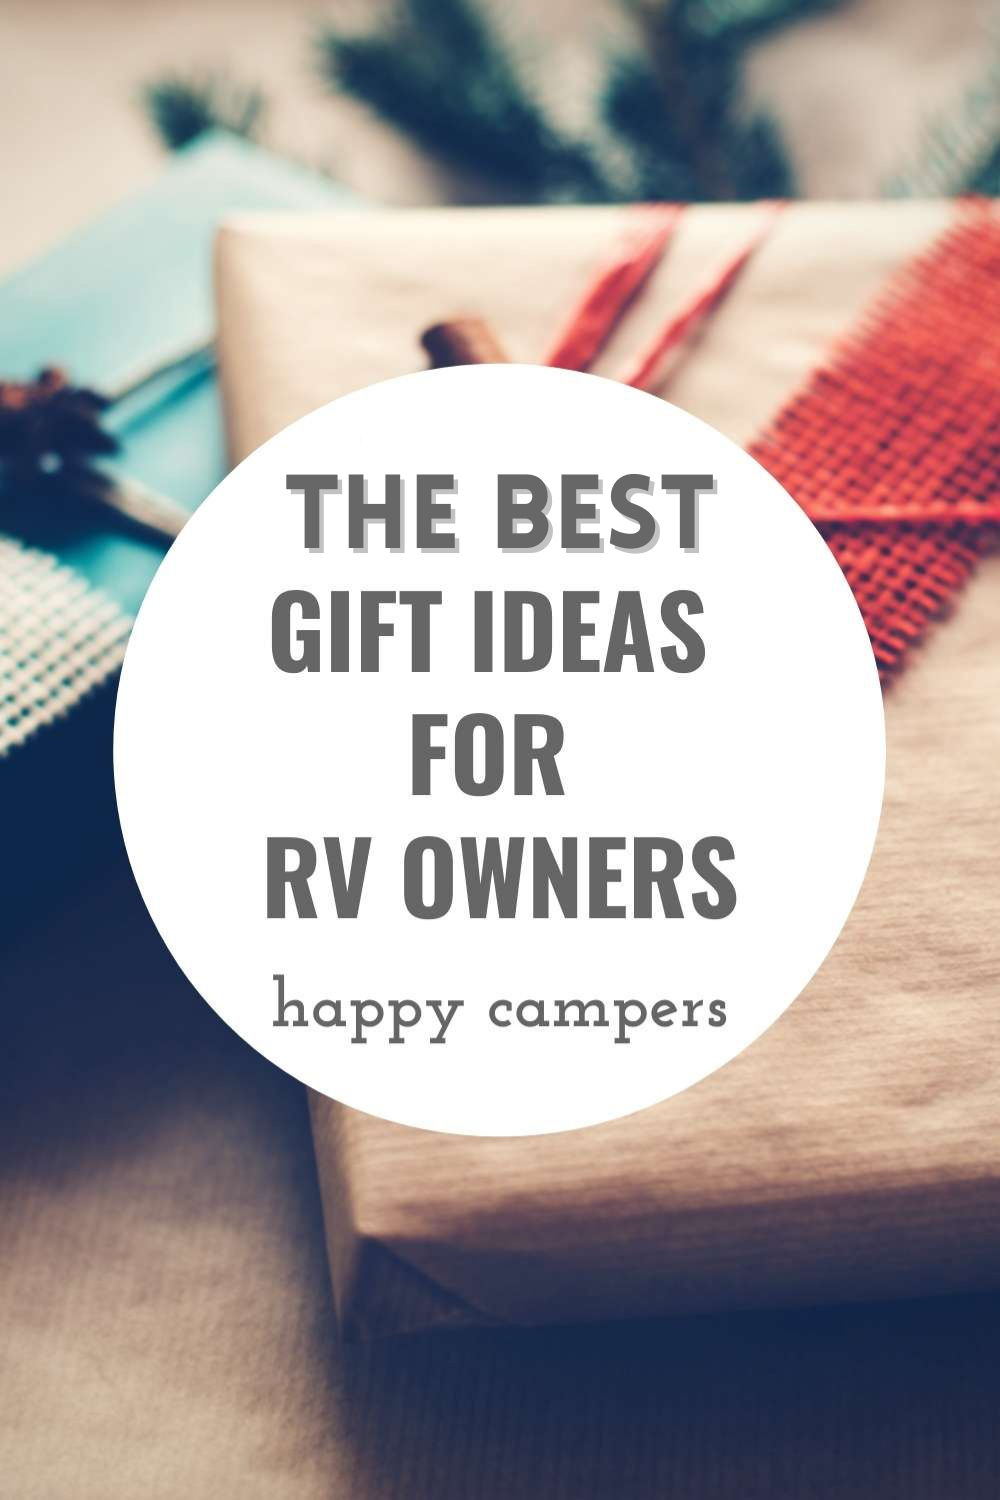 Best RV Gifts for Campers - Pinterest